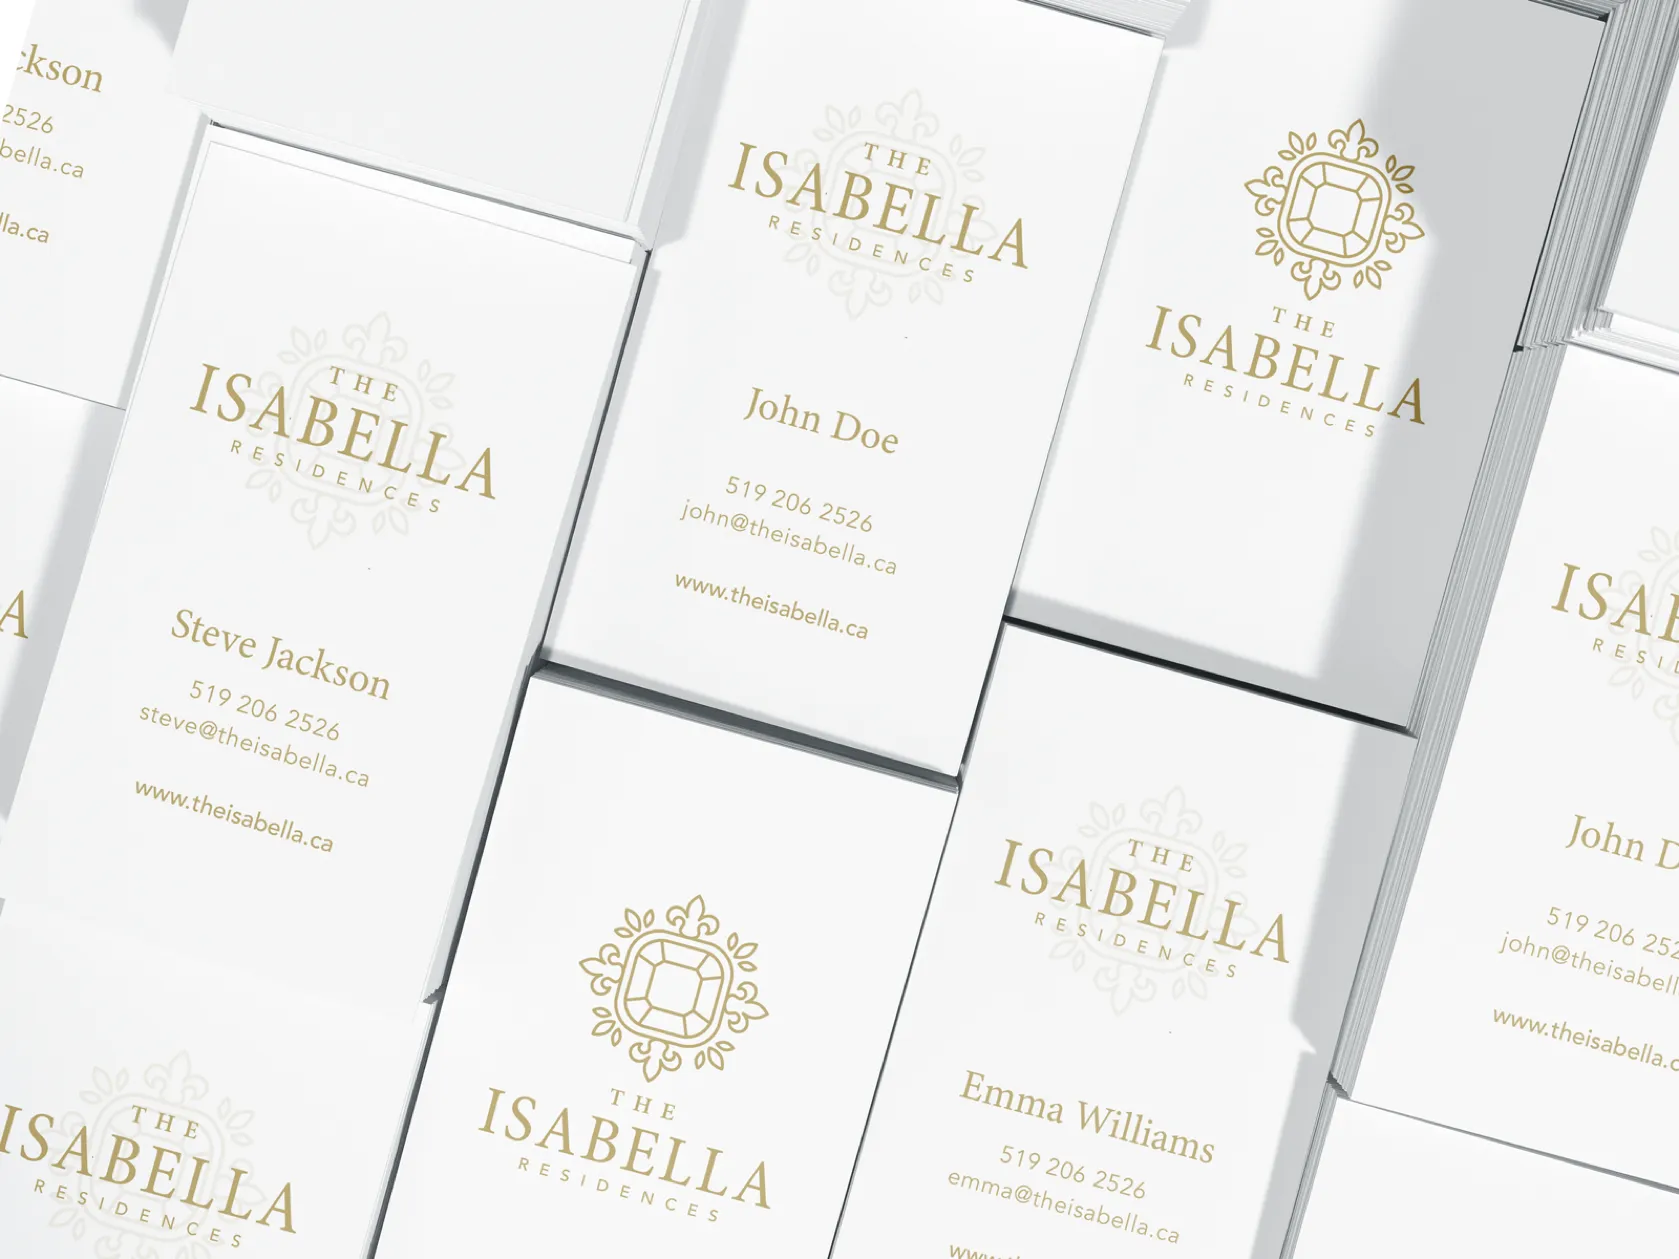 The Isabella Cards